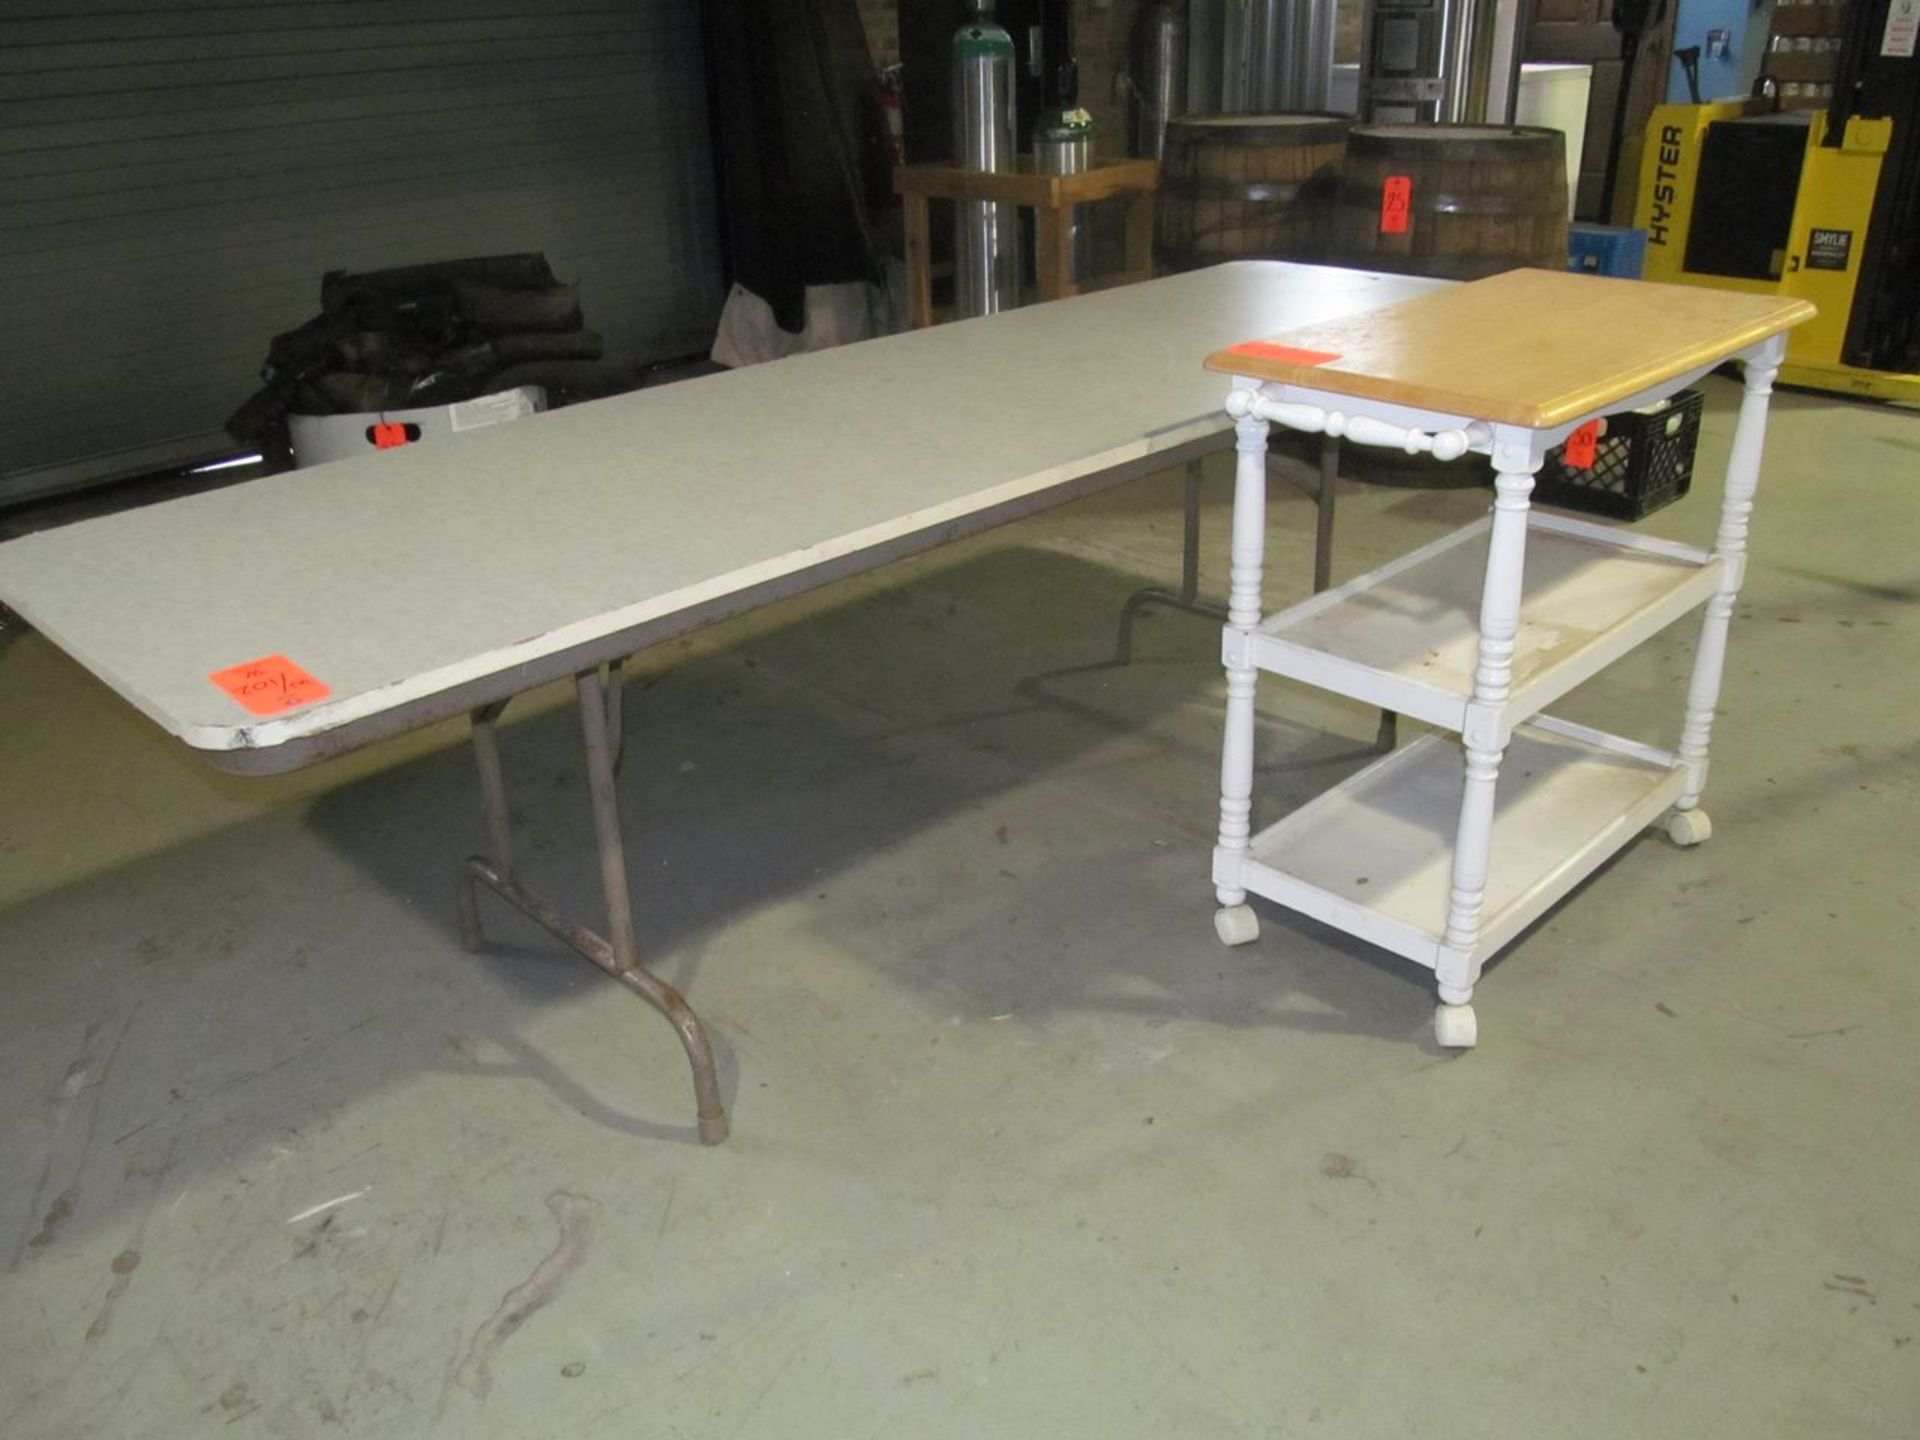 Lot - 8 ft. Folding Table, Portable 3-Tier Cart, 8 ft. x 4 ft. Wood Work Bench Table, (1) L-Shaped